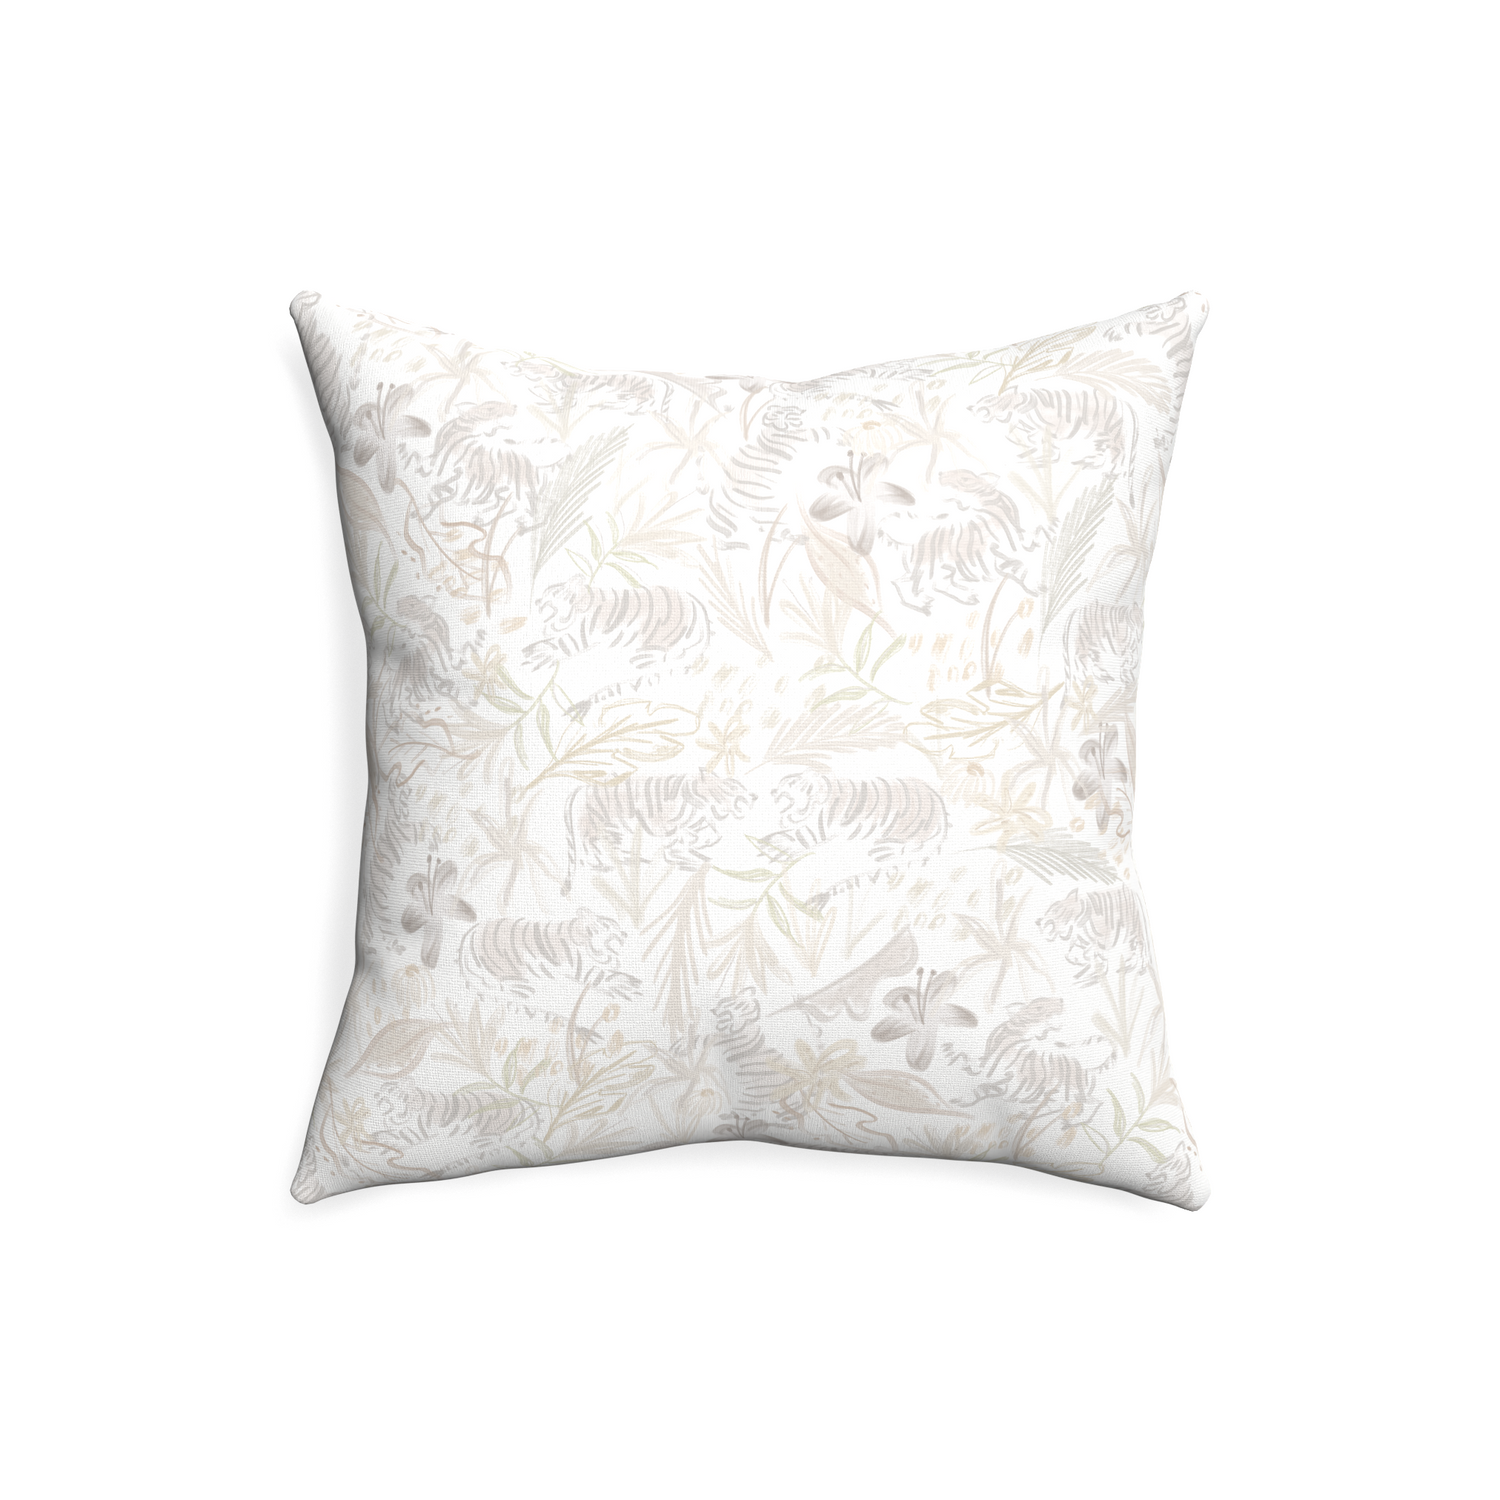 20-square frida sand custom beige chinoiserie tigerpillow with none on white background